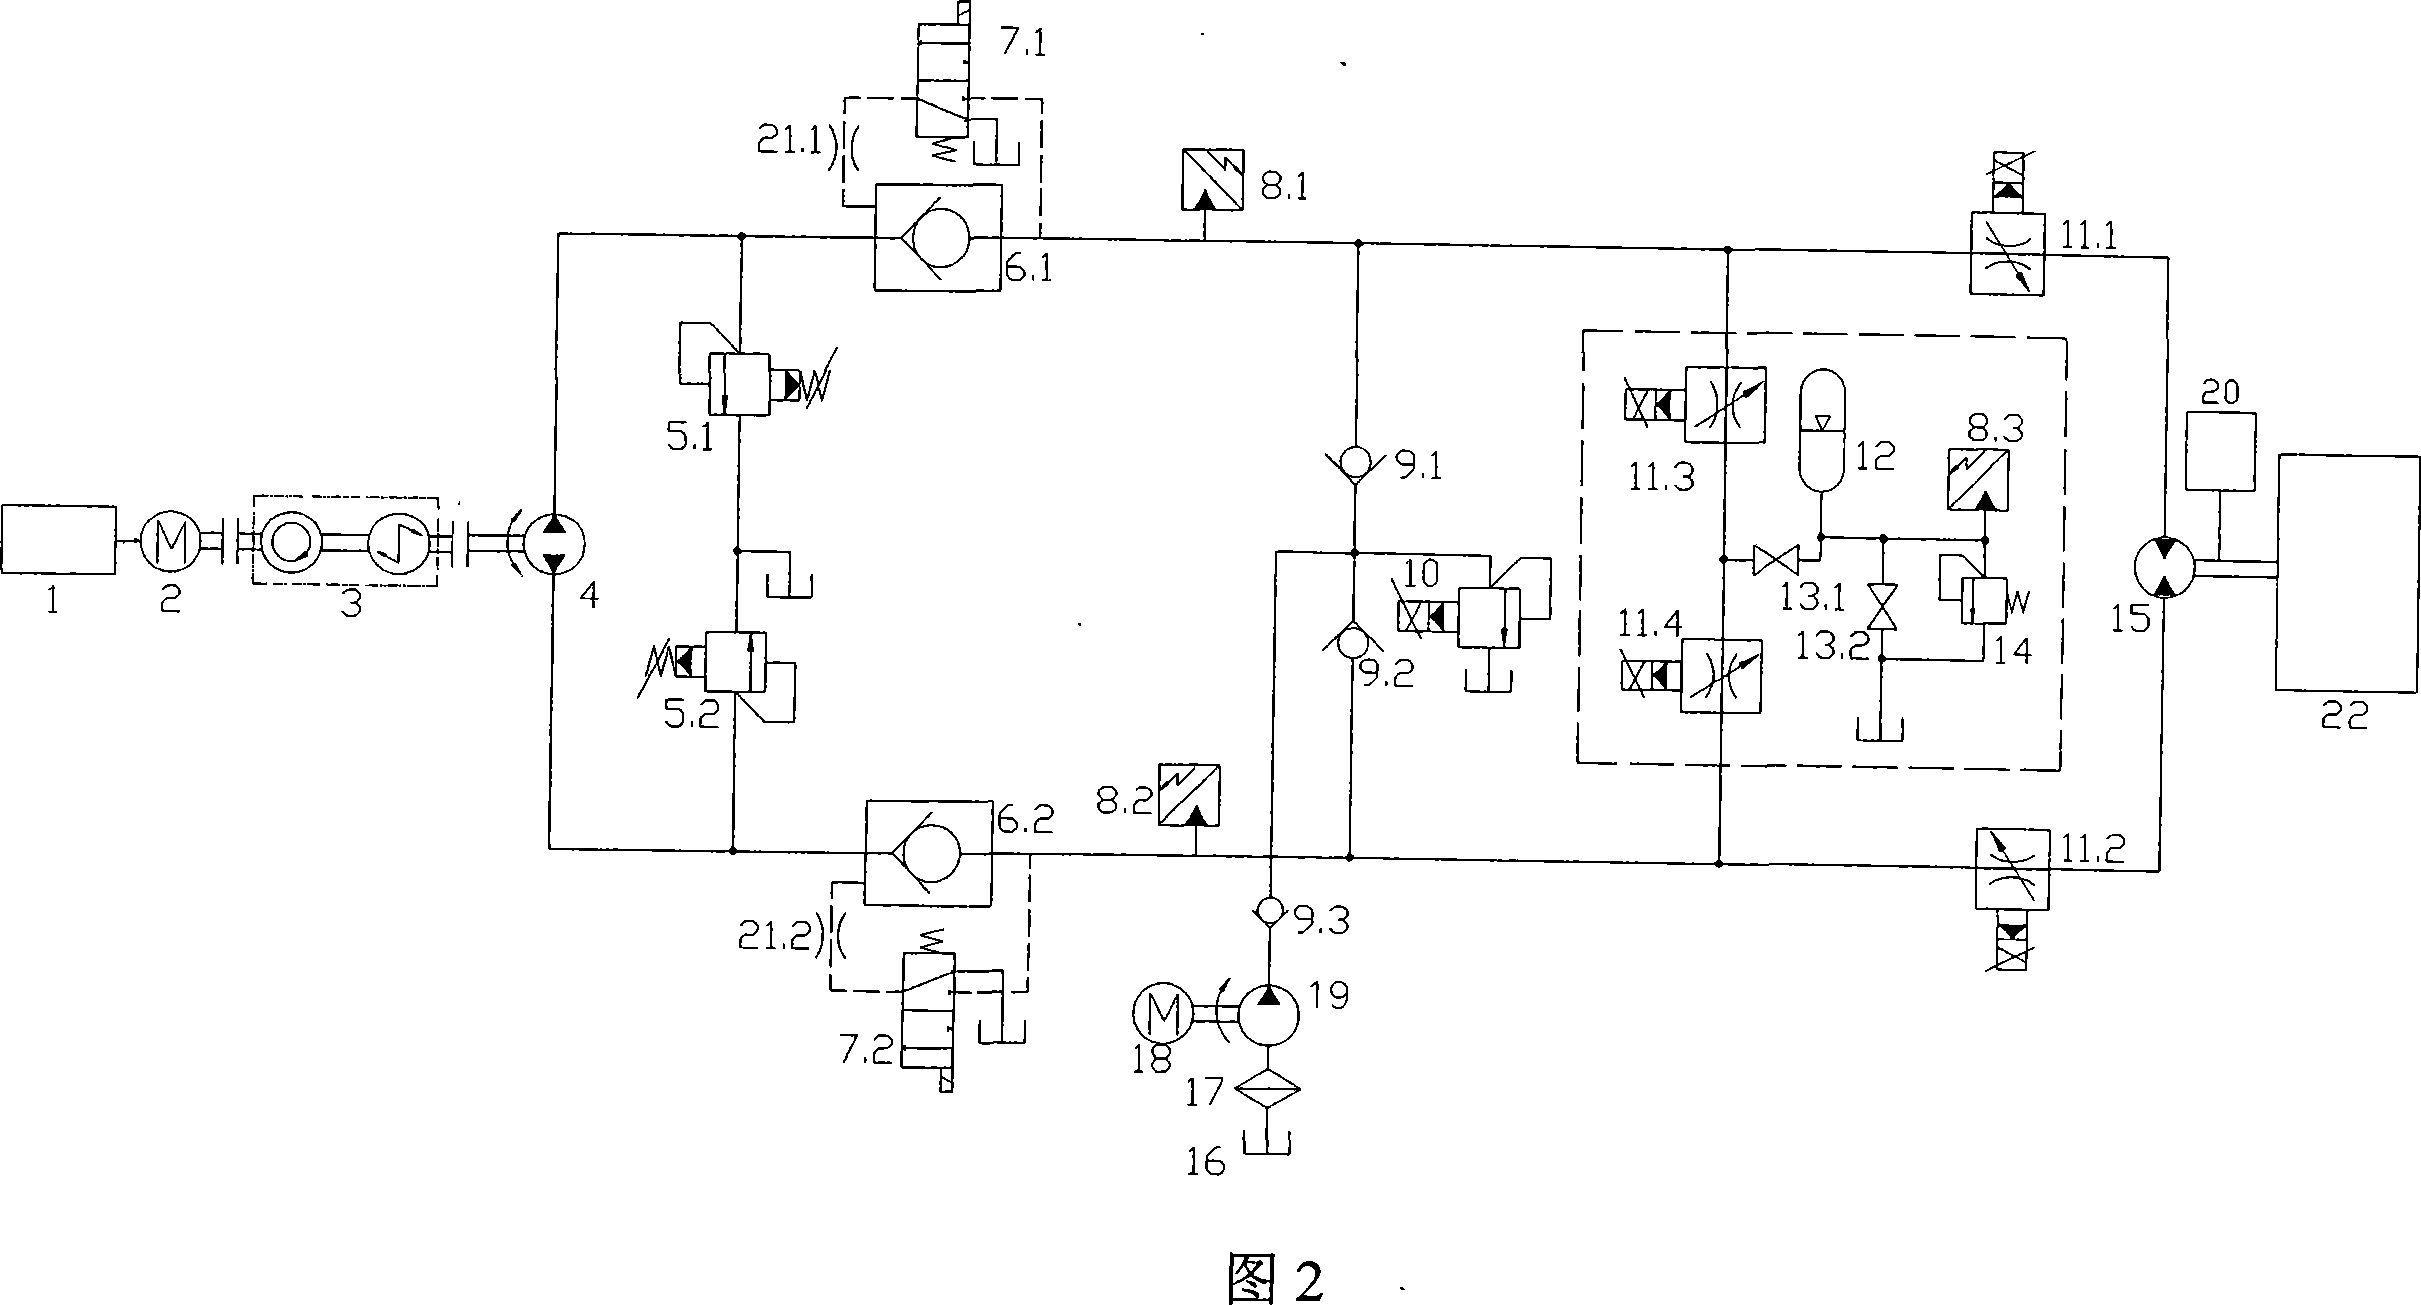 Variable frequency pump-control-motor closed circuit based on energy regulation